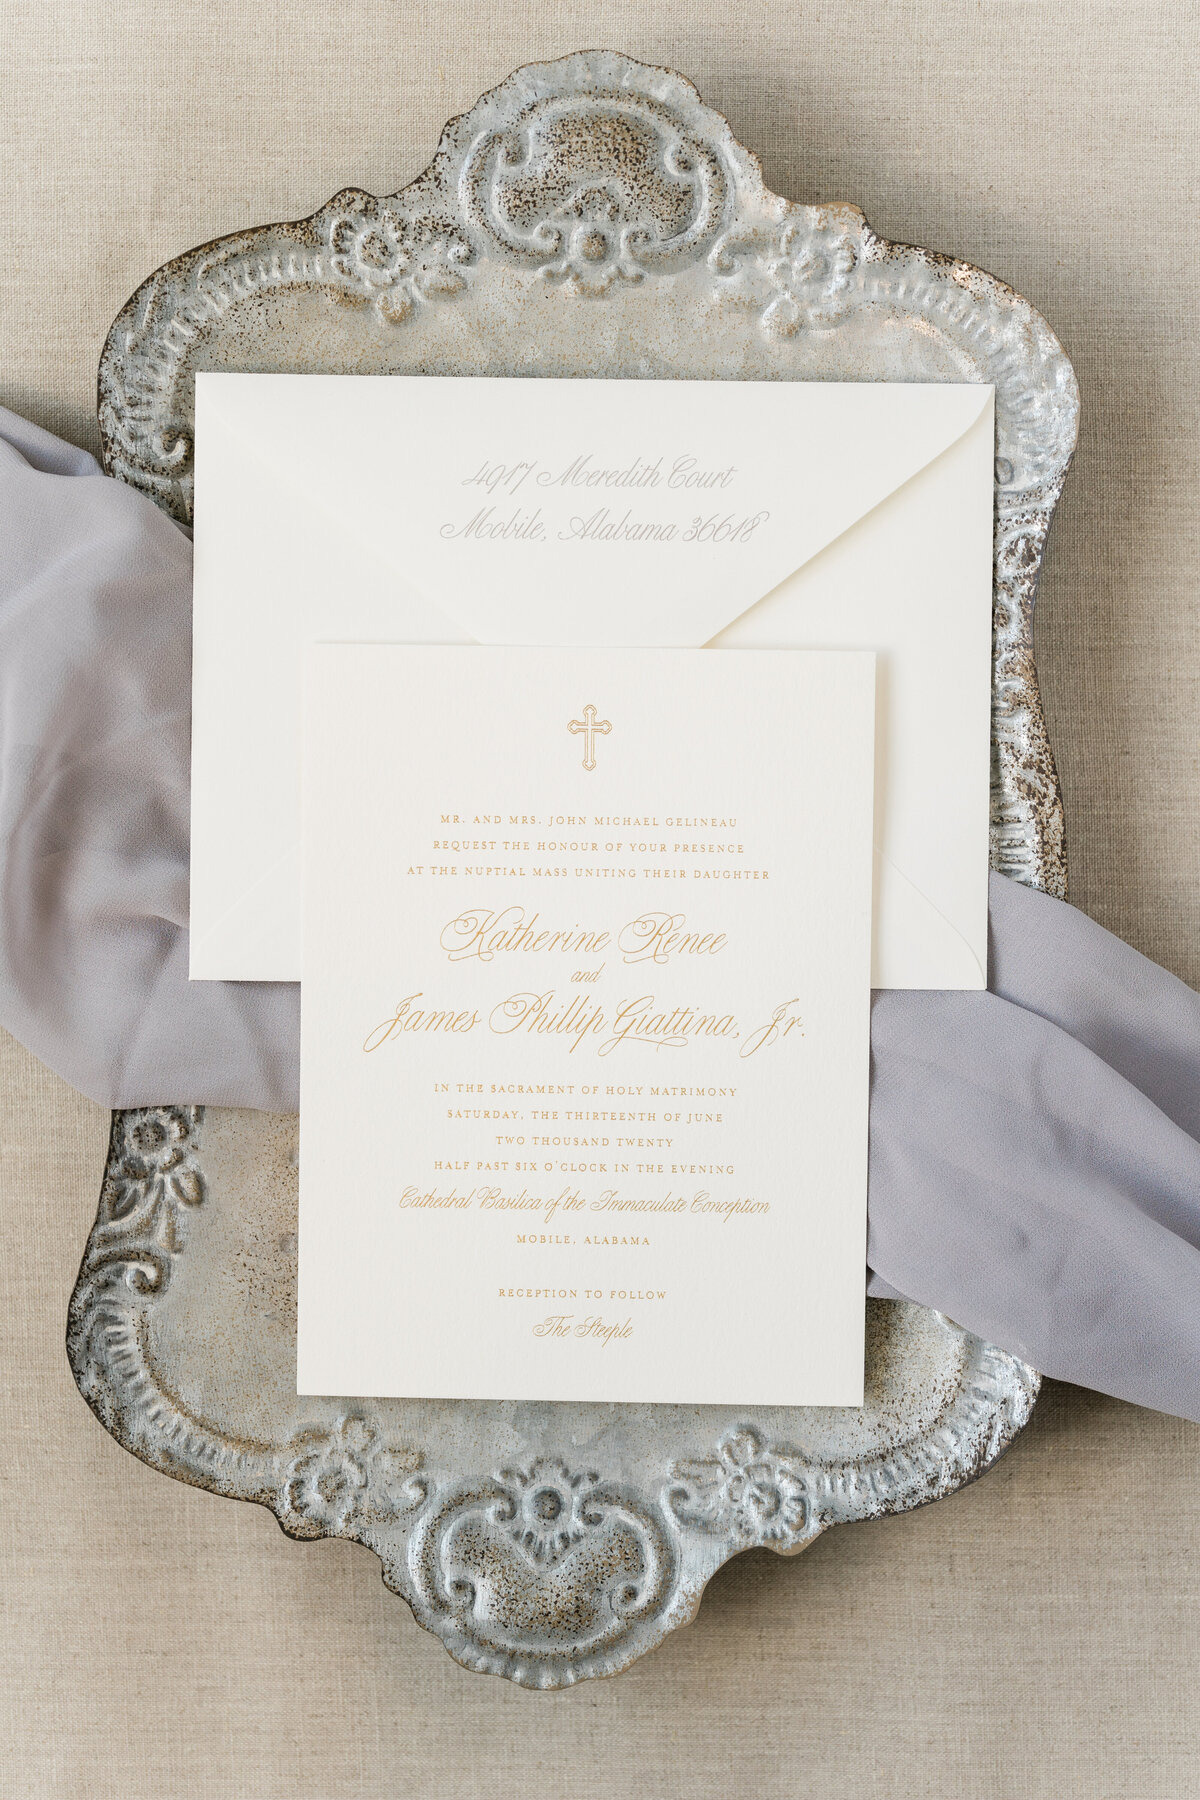 White and gold wedding invitations on silver platter